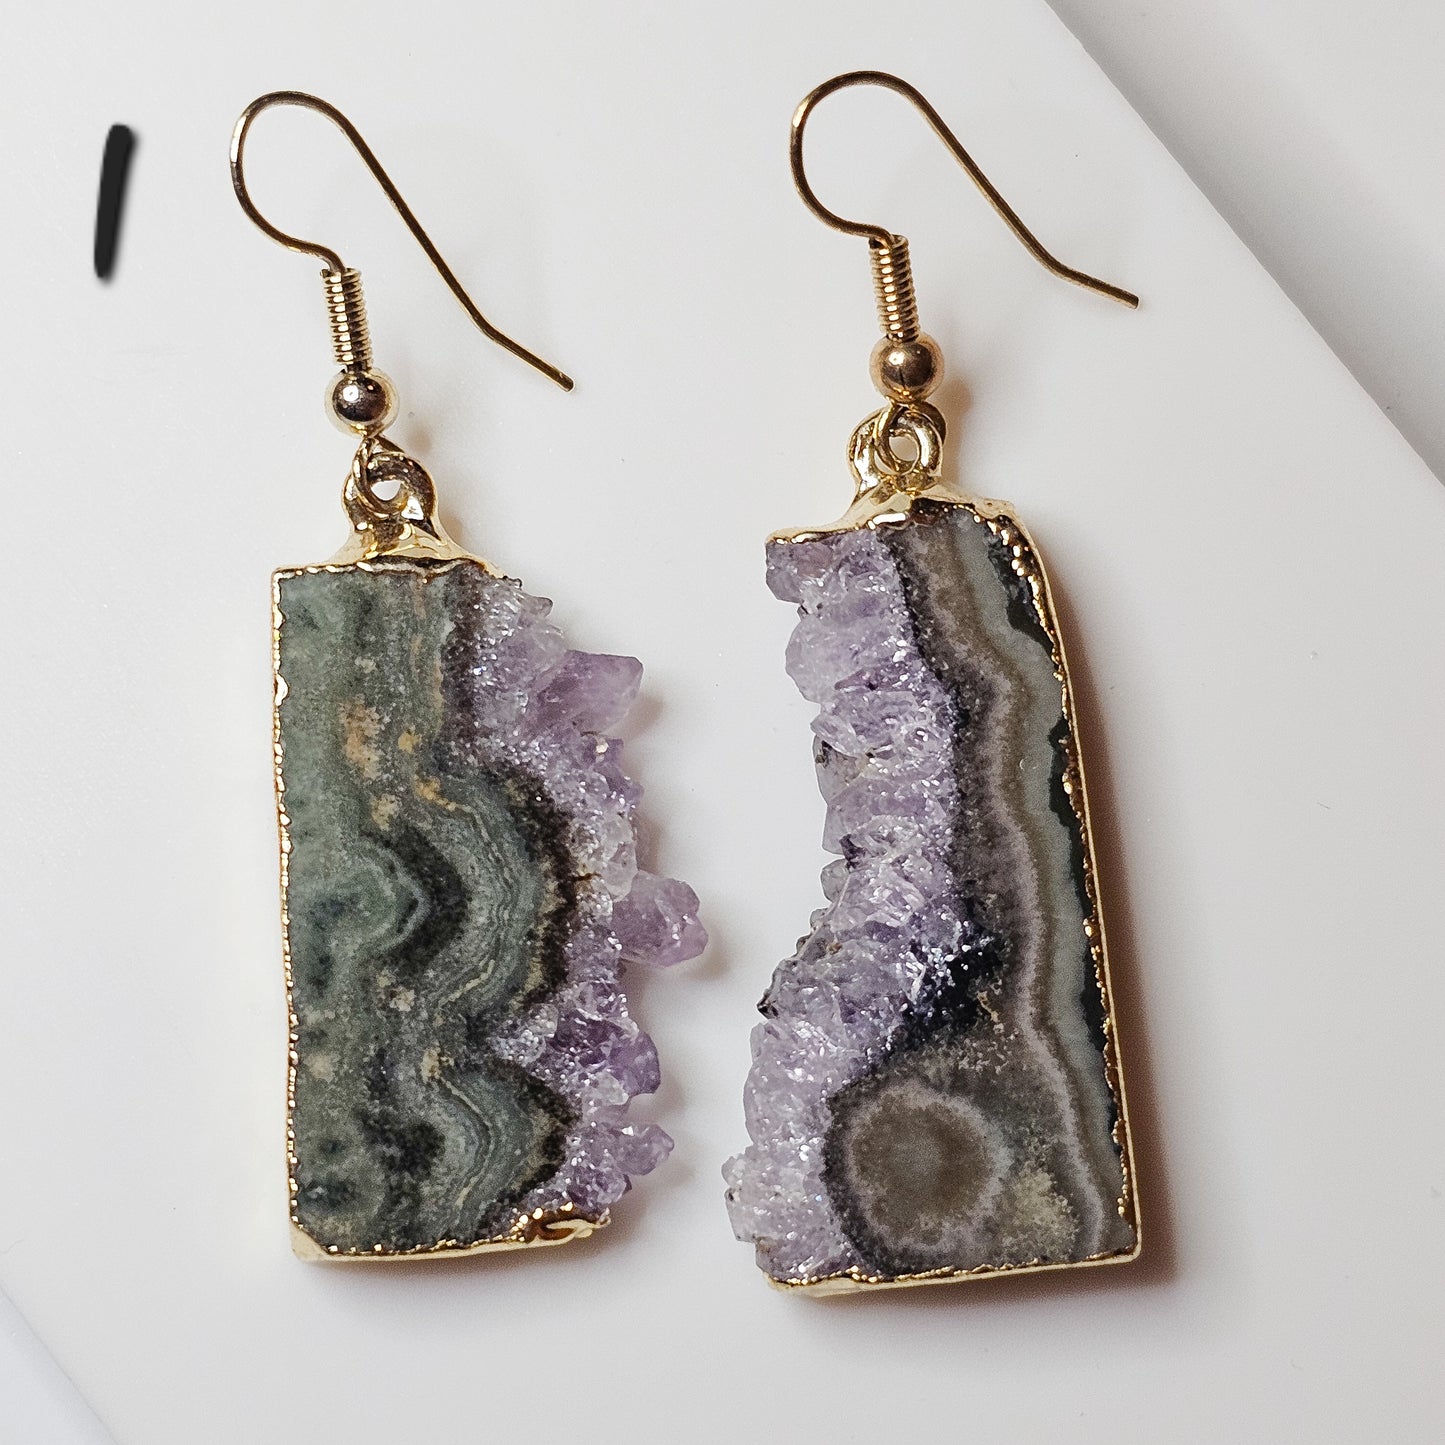 Brazilian Amethyst Stalactite 18k gold plated earrings with hypo-allergenic ear wires.